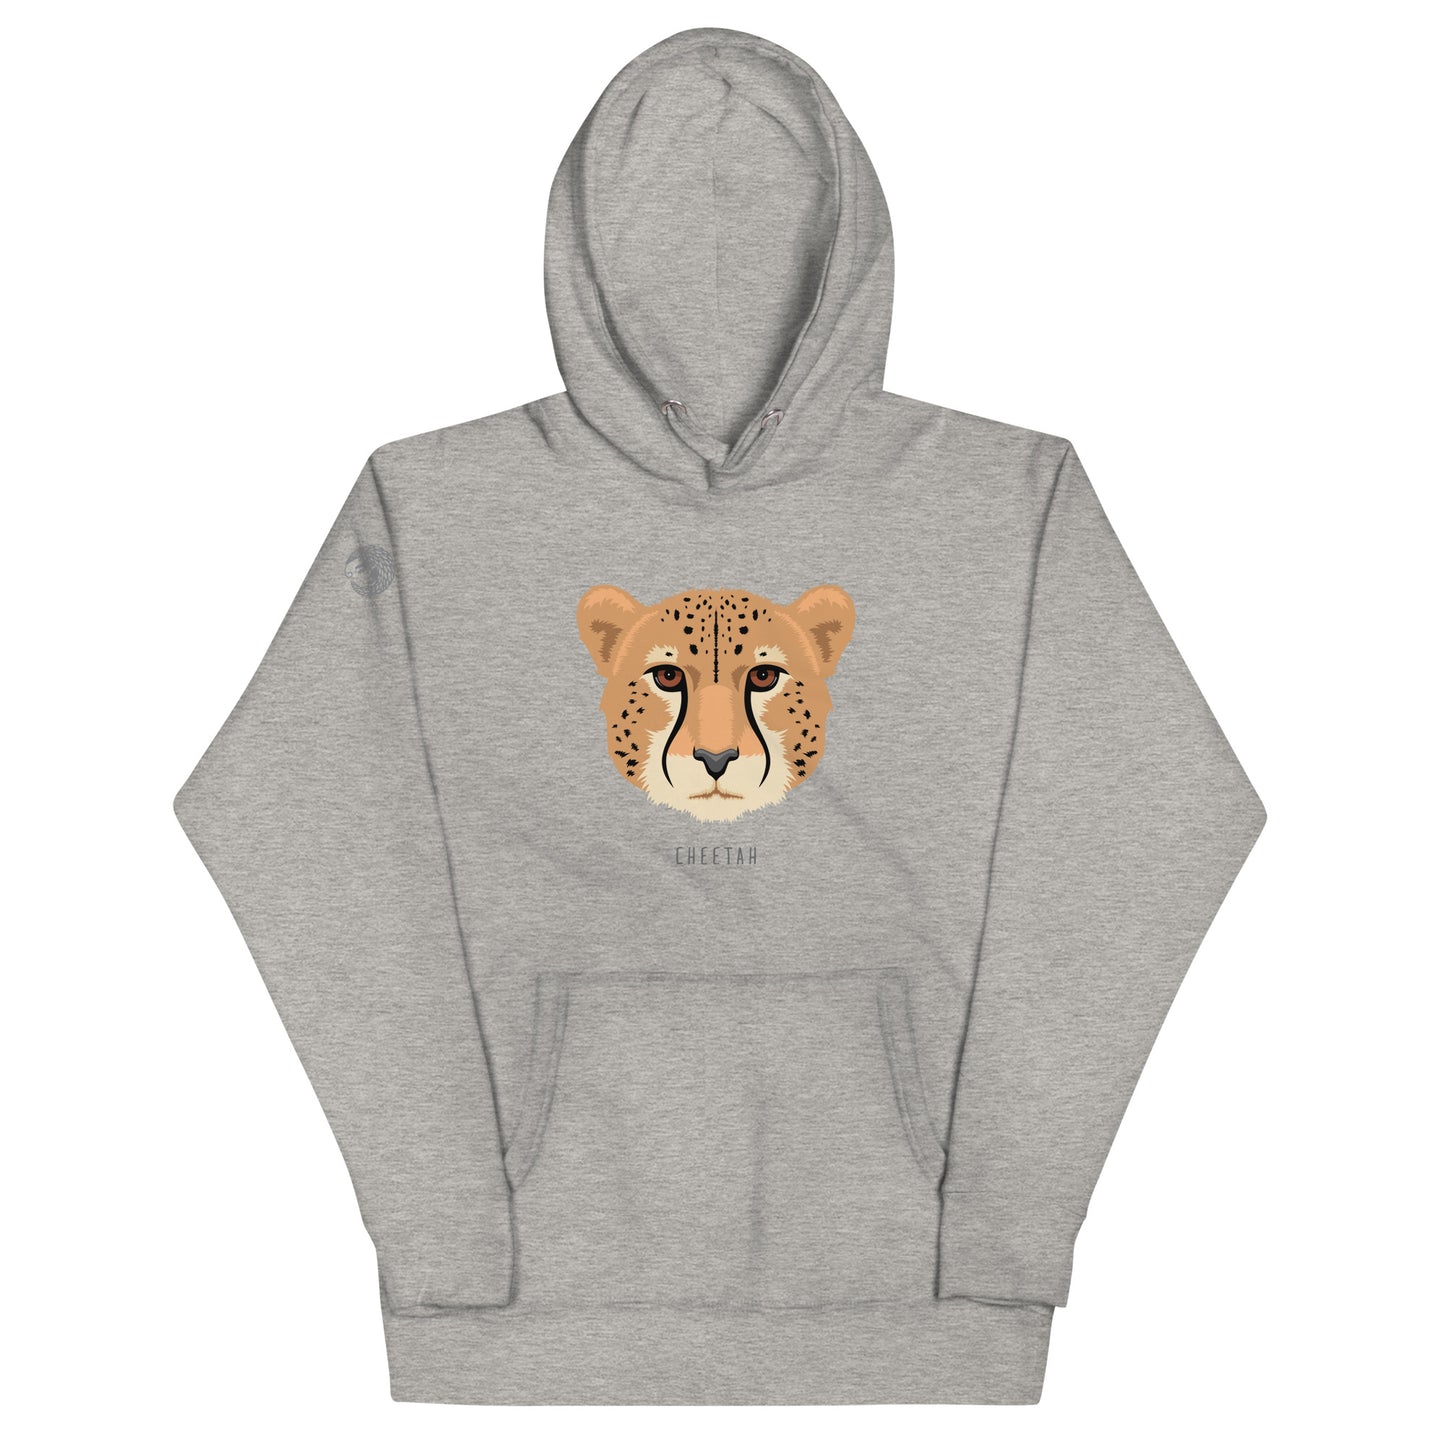 A light gray, hooded, pullover sweatshirt with an illustration of a cheetah's face and thew world "cheetah" beneath it. 